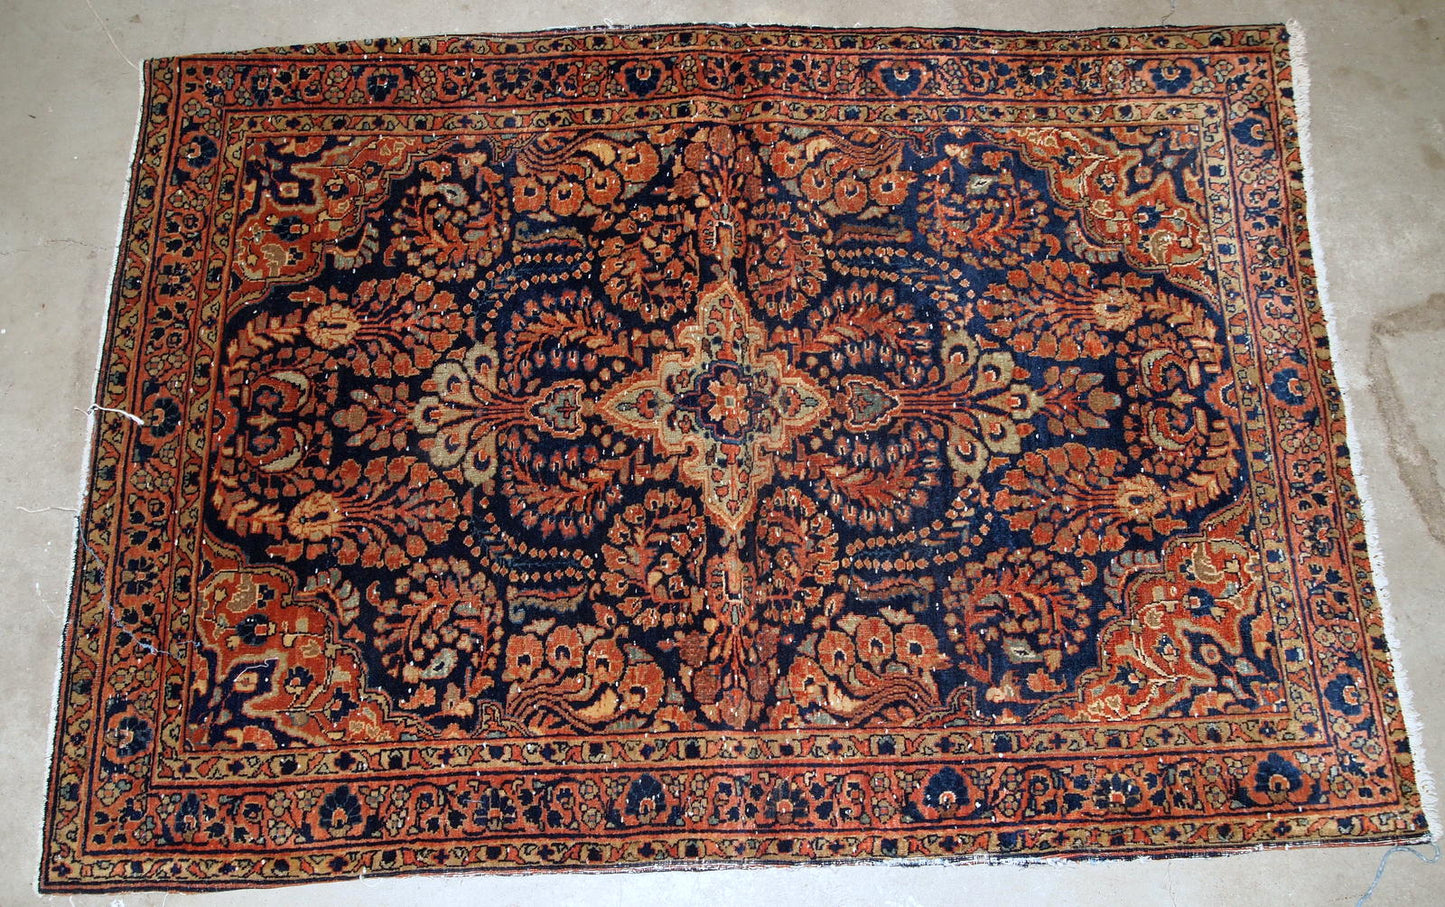 Handmade antique Persian Sarouk rug in original condition, it has some signs of age. The rug is from the beginning of 20th century made in red wool.